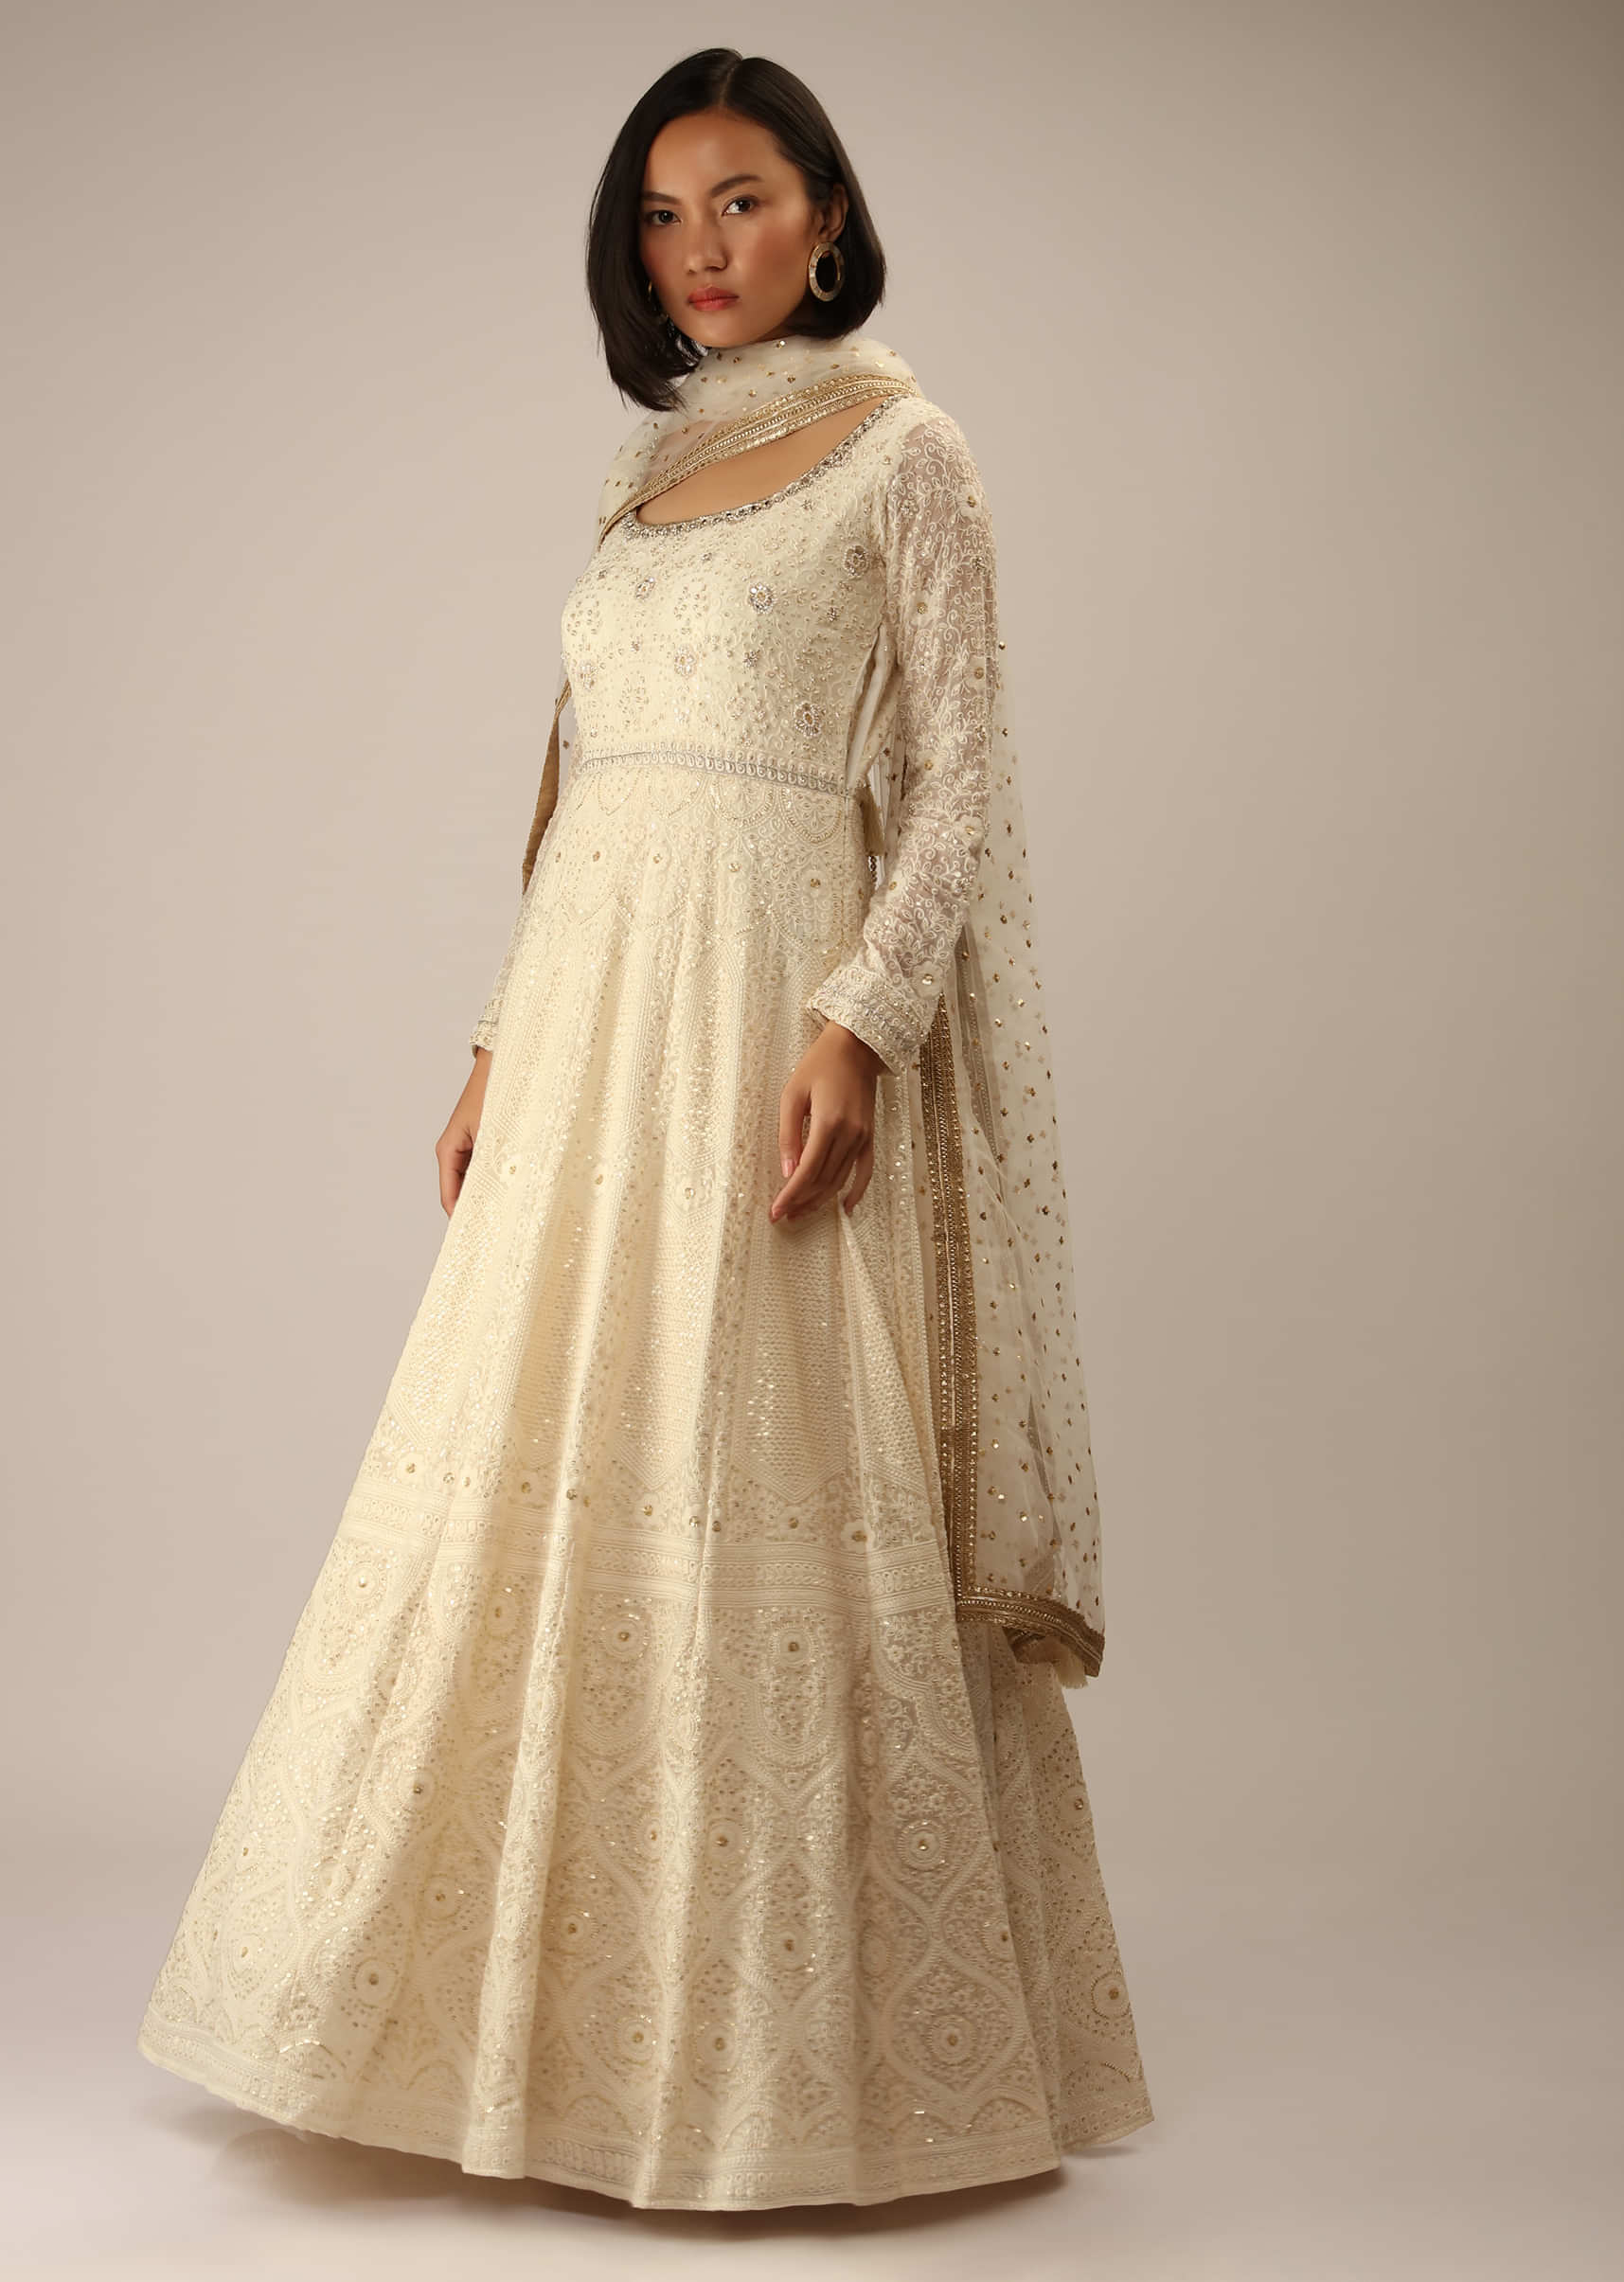 Off White Anarkali Suit In Georgette With Lucknowi Thread And Sequins Embroidered Mughal Kalis And Full Sleeves